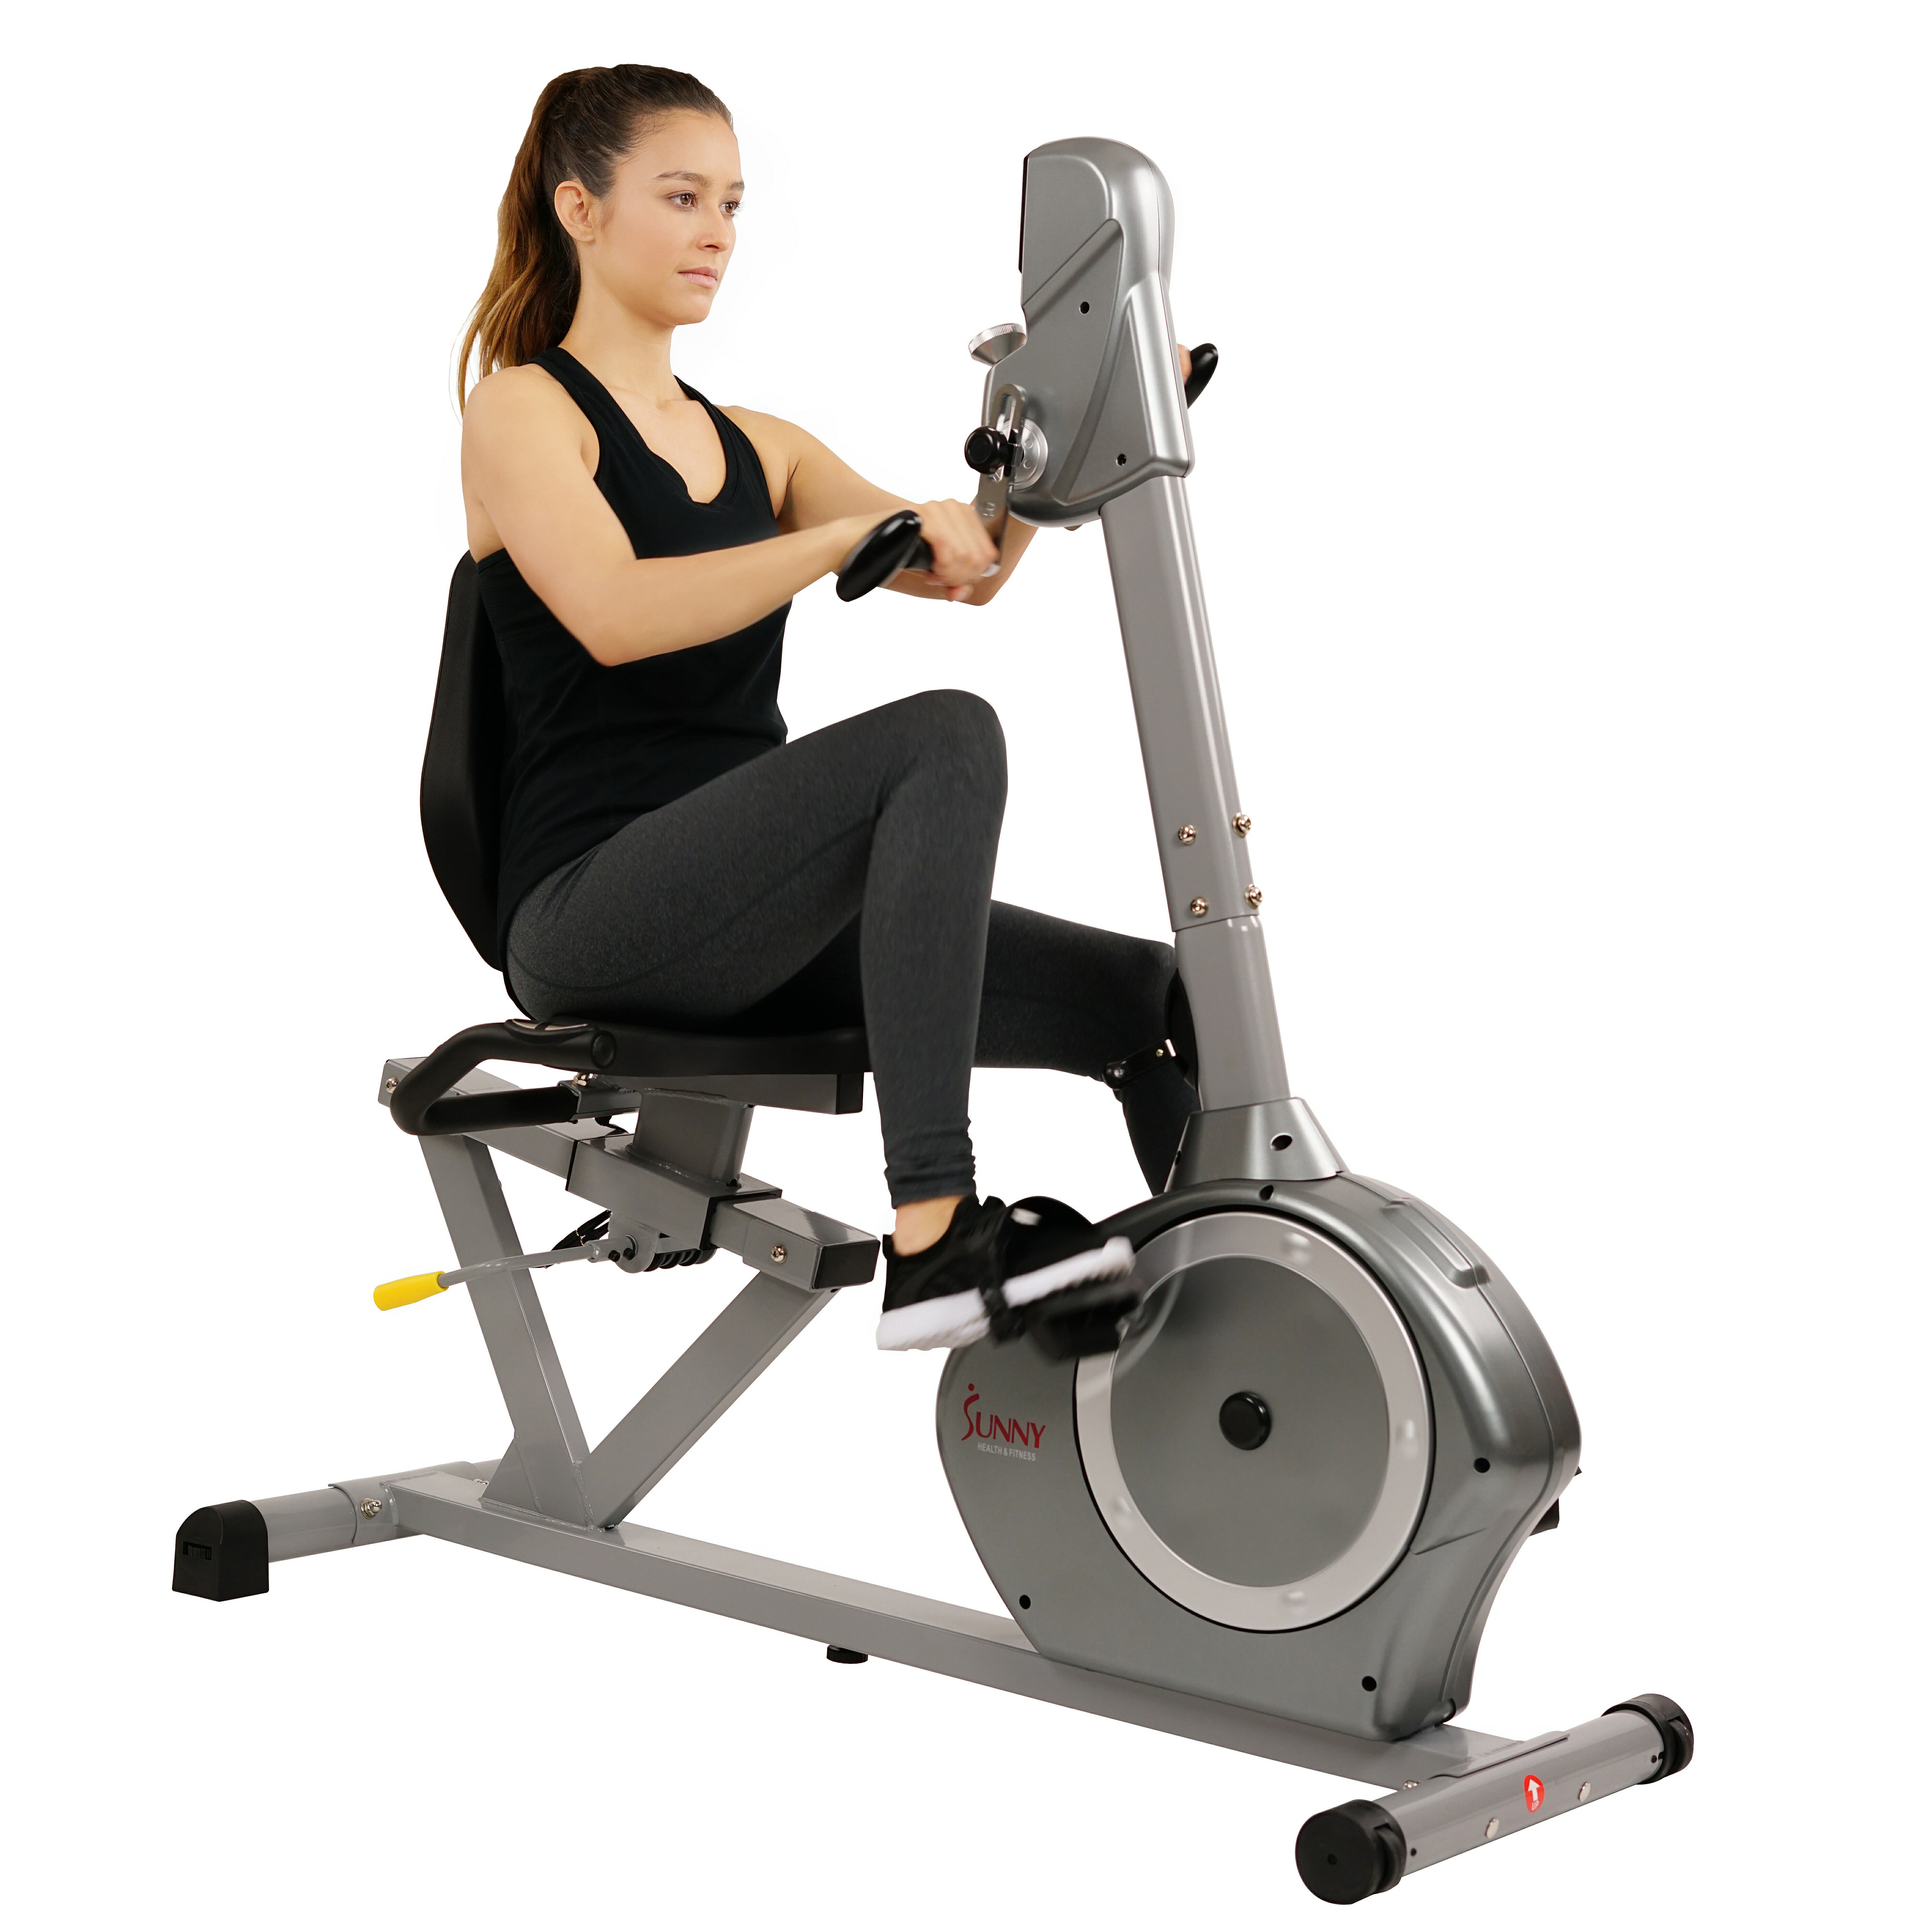 Simple Exercise Bike With Arm Workout for Push Pull Legs